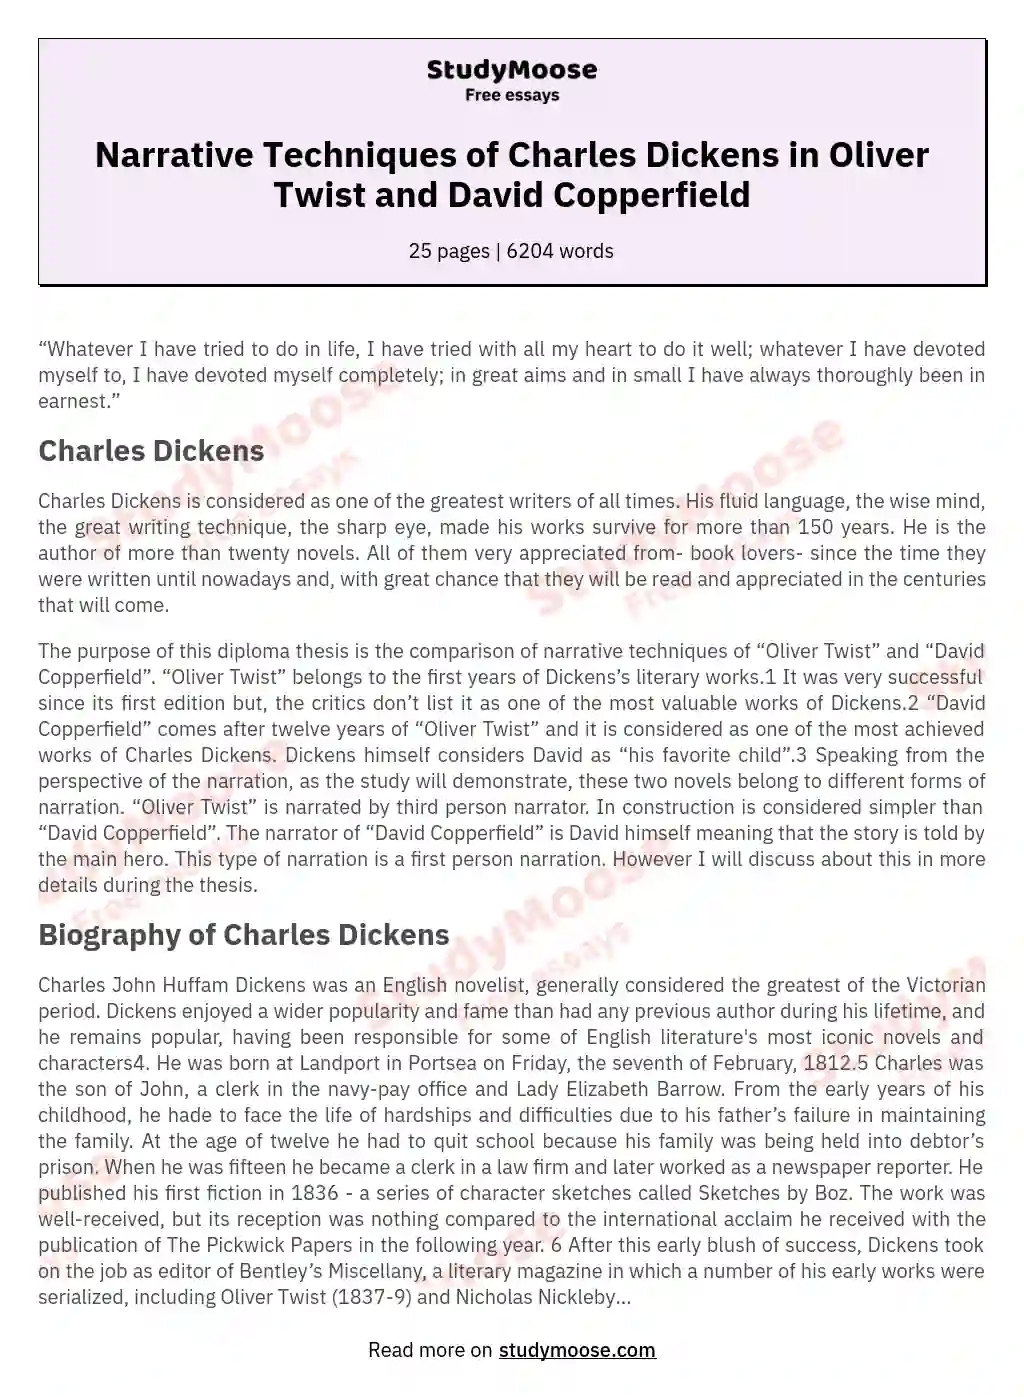 Narrative Techniques of Charles Dickens in Oliver Twist and David Copperfield